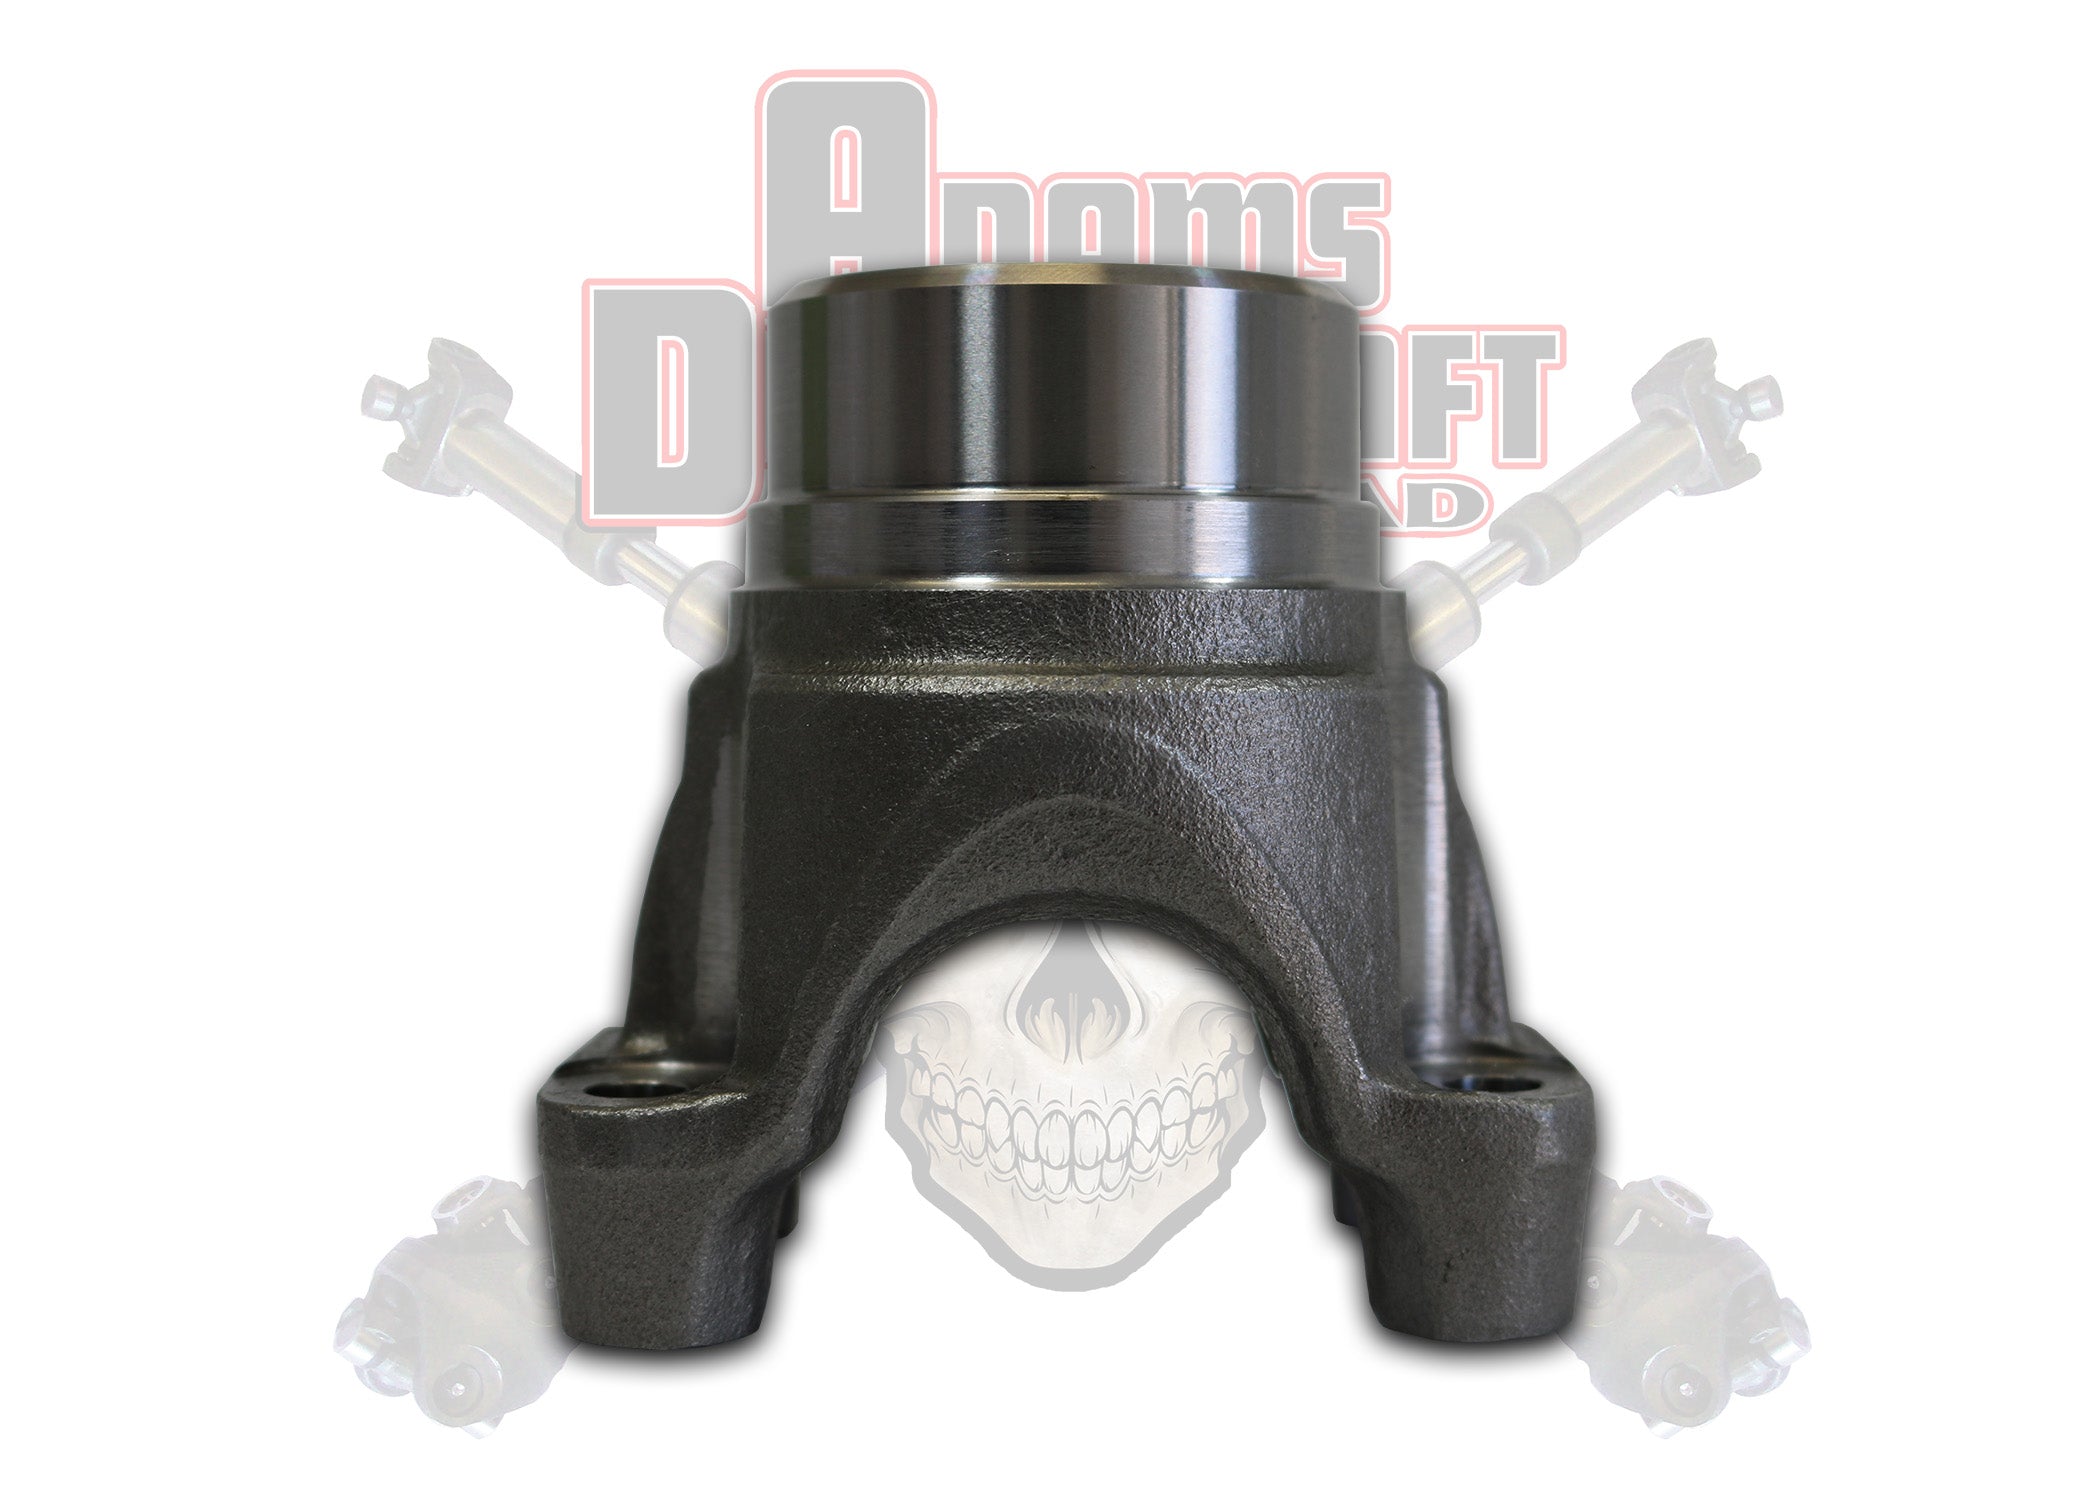 Adams Forged Jeep JL Sport Rear 1310 Series Pinion Yoke U-Bolt Style with an M220 Differential.